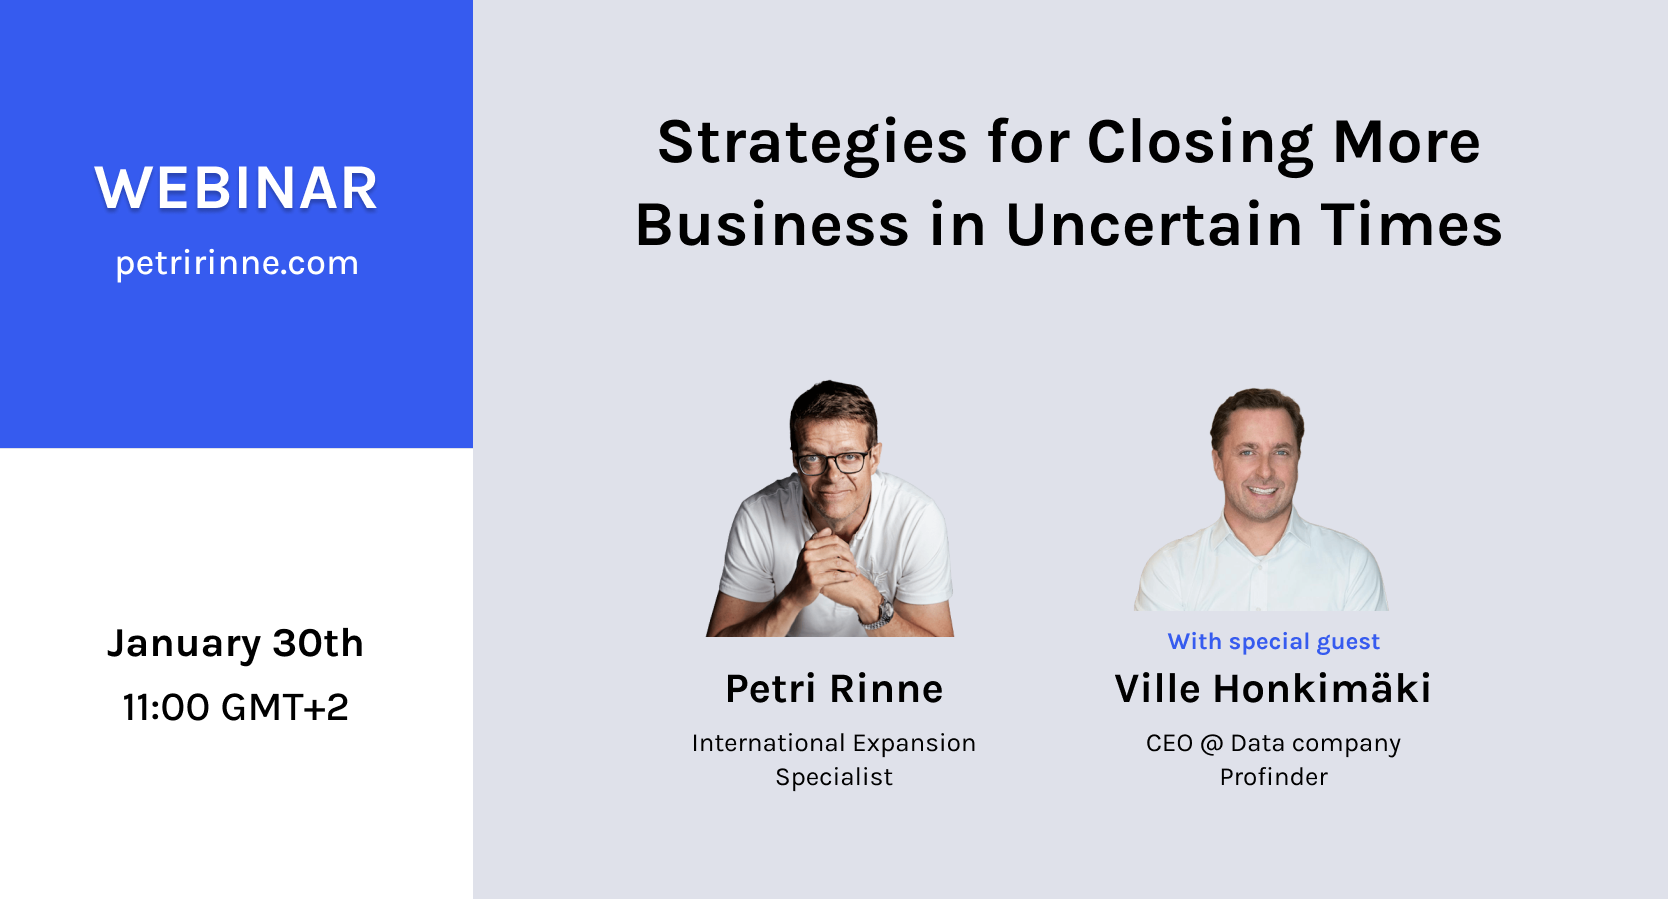 Strategies for Closing More Business in Uncertain Times with Ville Honkimäki